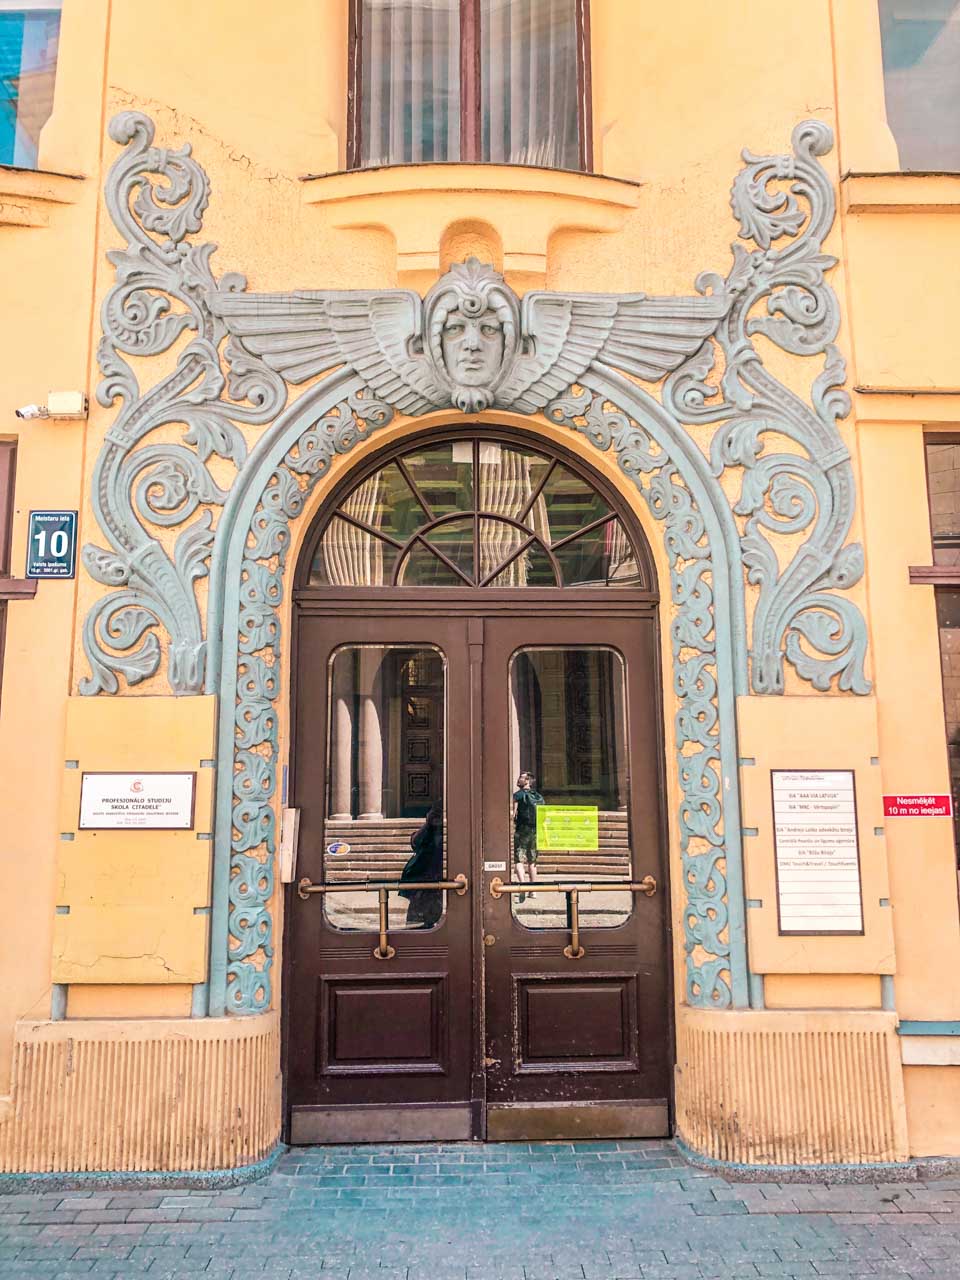 The entrance to the Cat House in Riga, Latvia